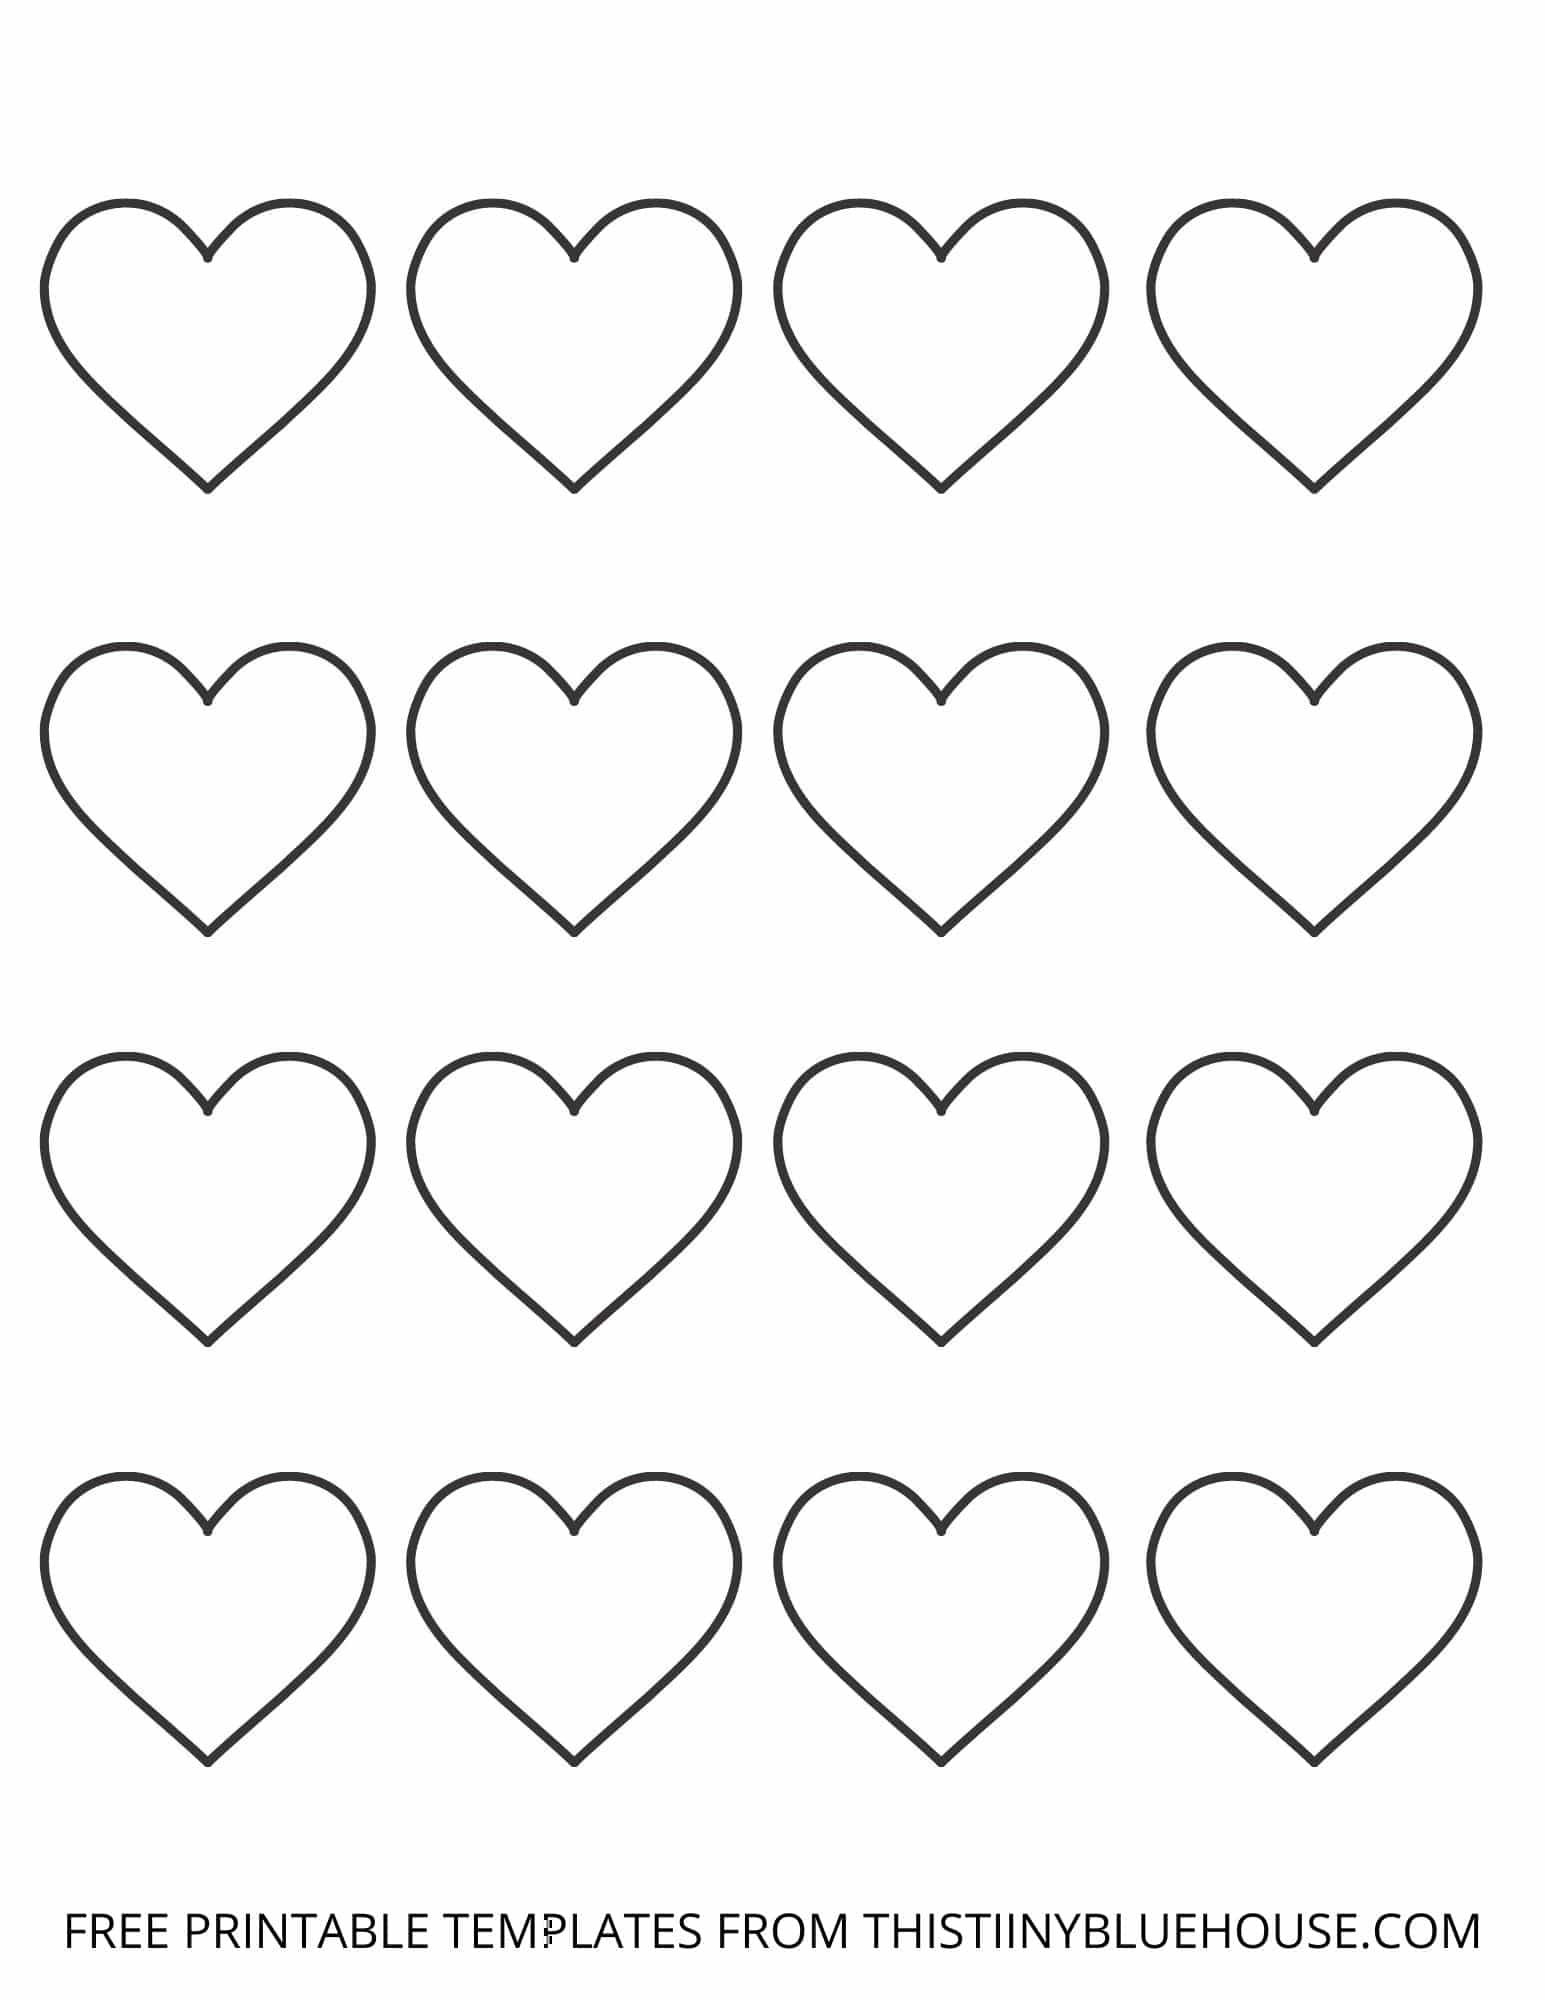 Free Printable Heart Template 6 Sizes Of Heart Outlines Small Medium Large Printable Heart Template Heart Template Heart Shapes Template